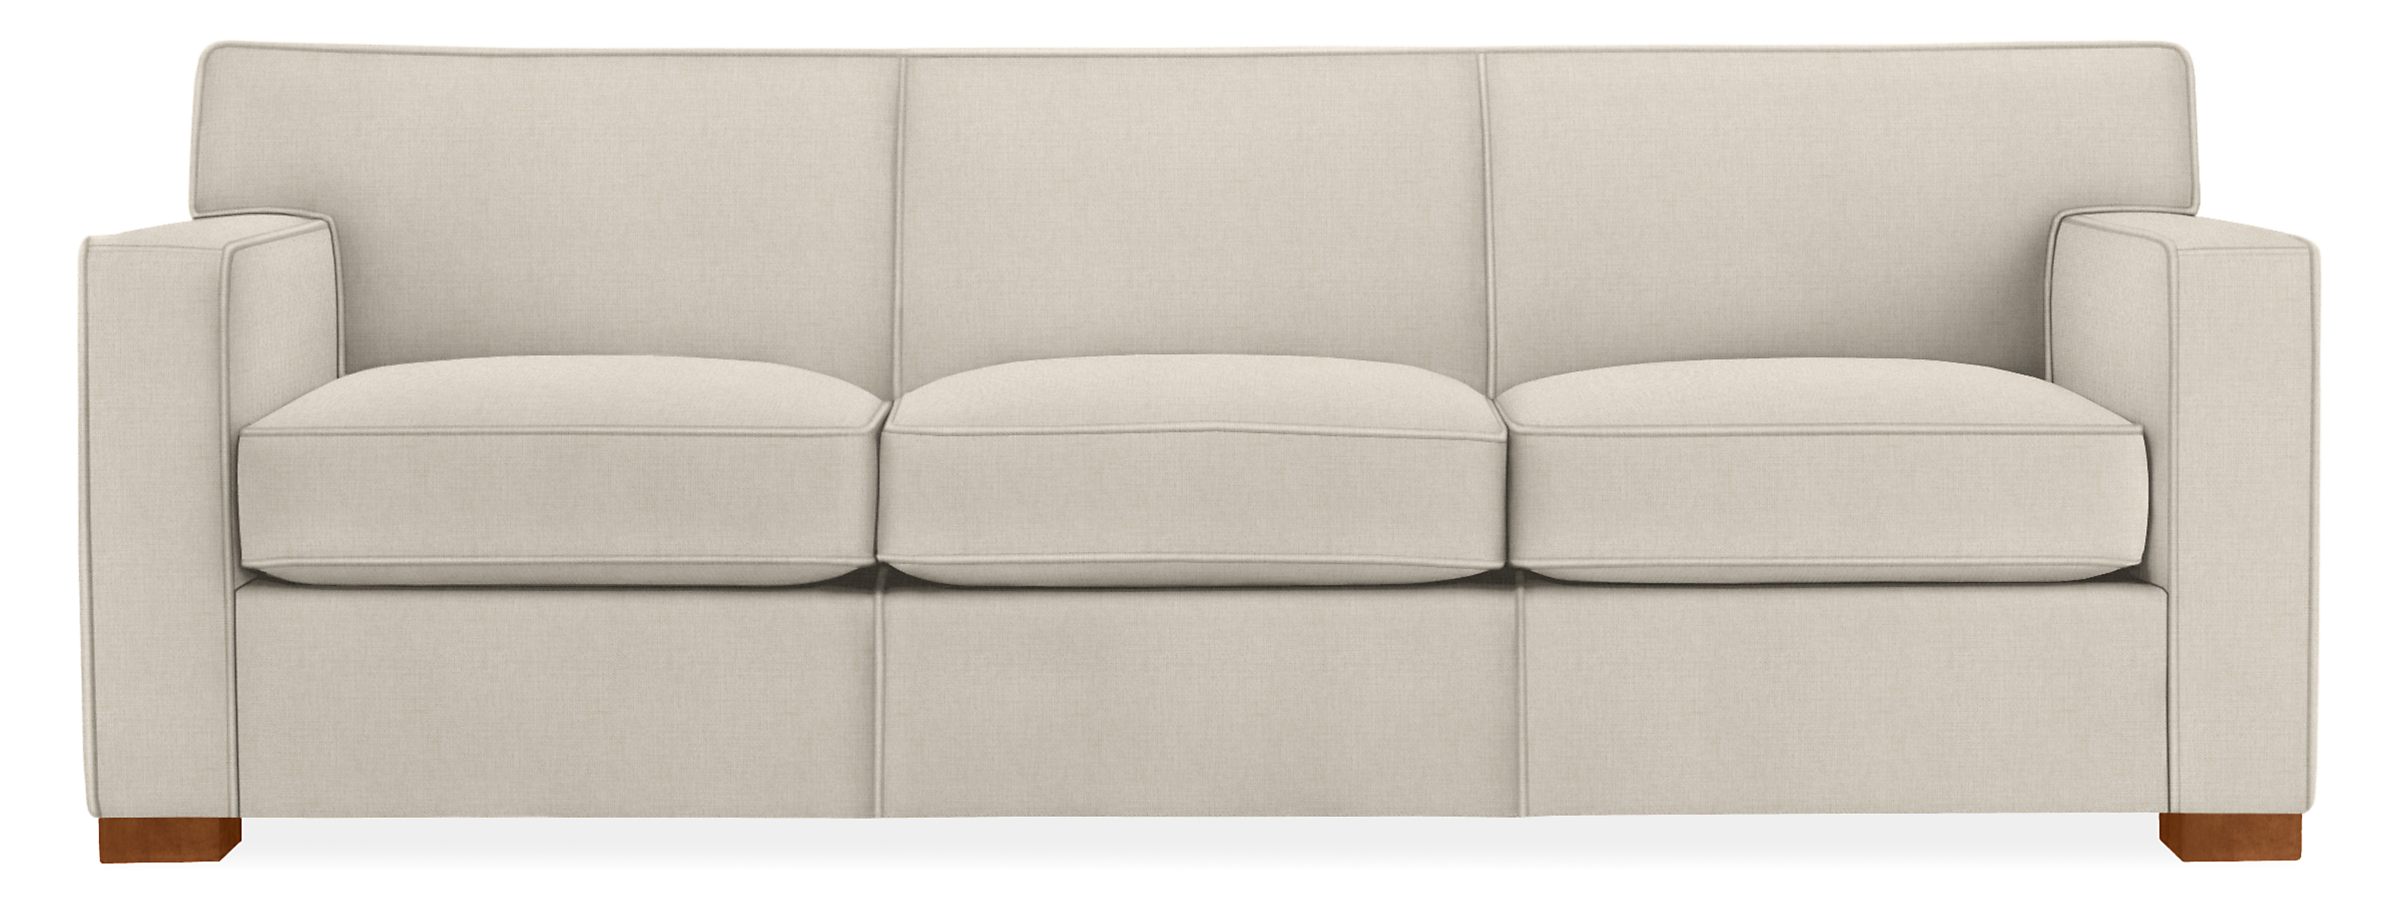 Dean 88" Sofa in Tepic Ivory with Mocha Legs